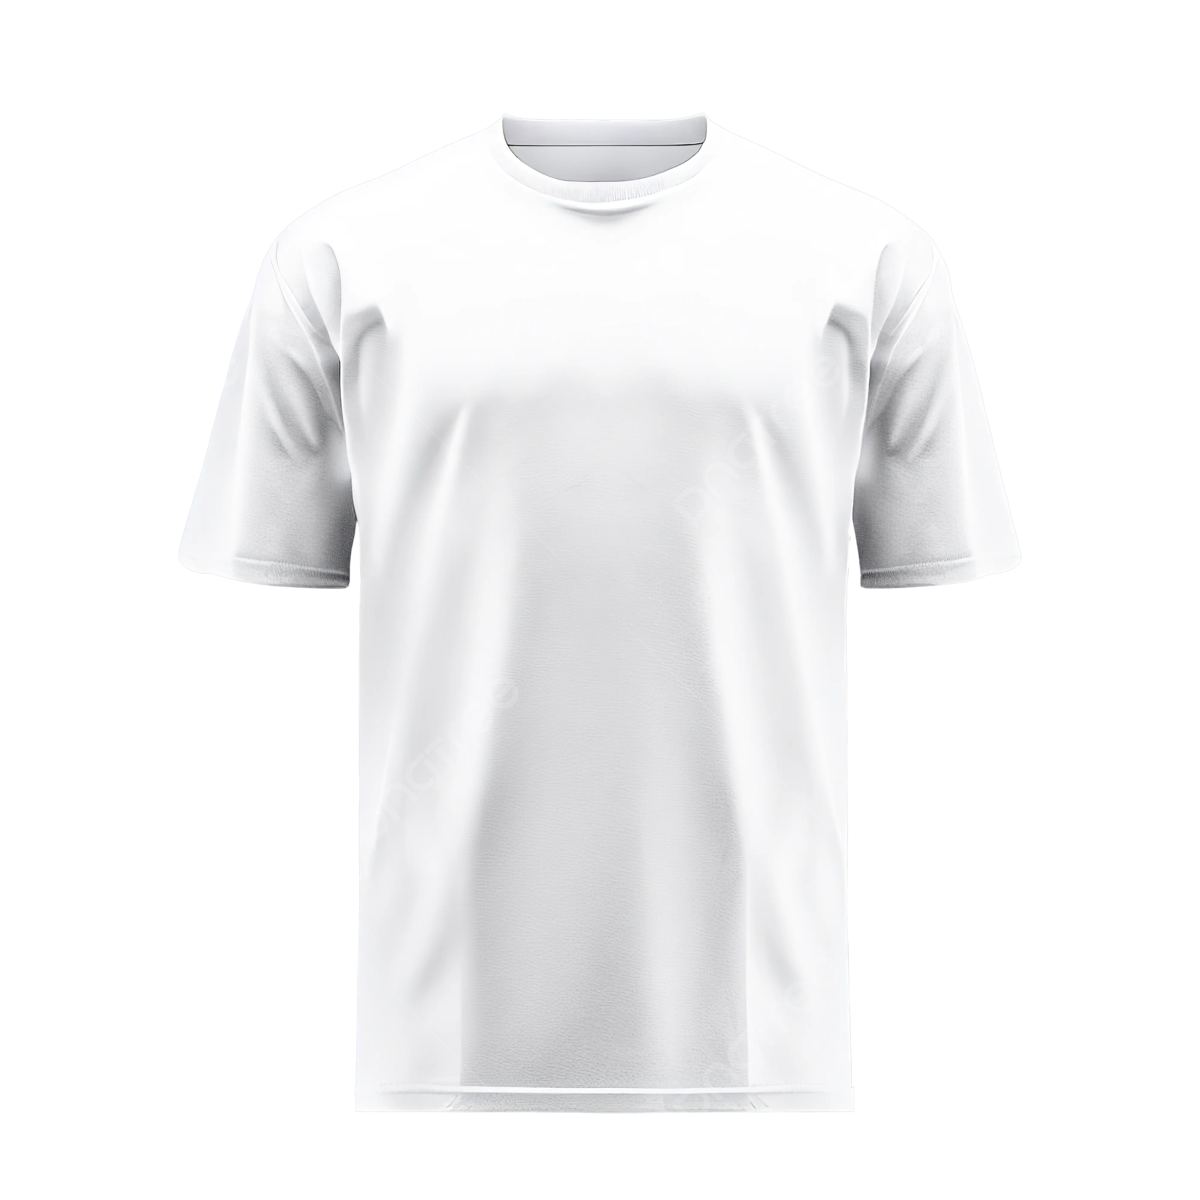 White Shirt Front and Back PNG HD Image